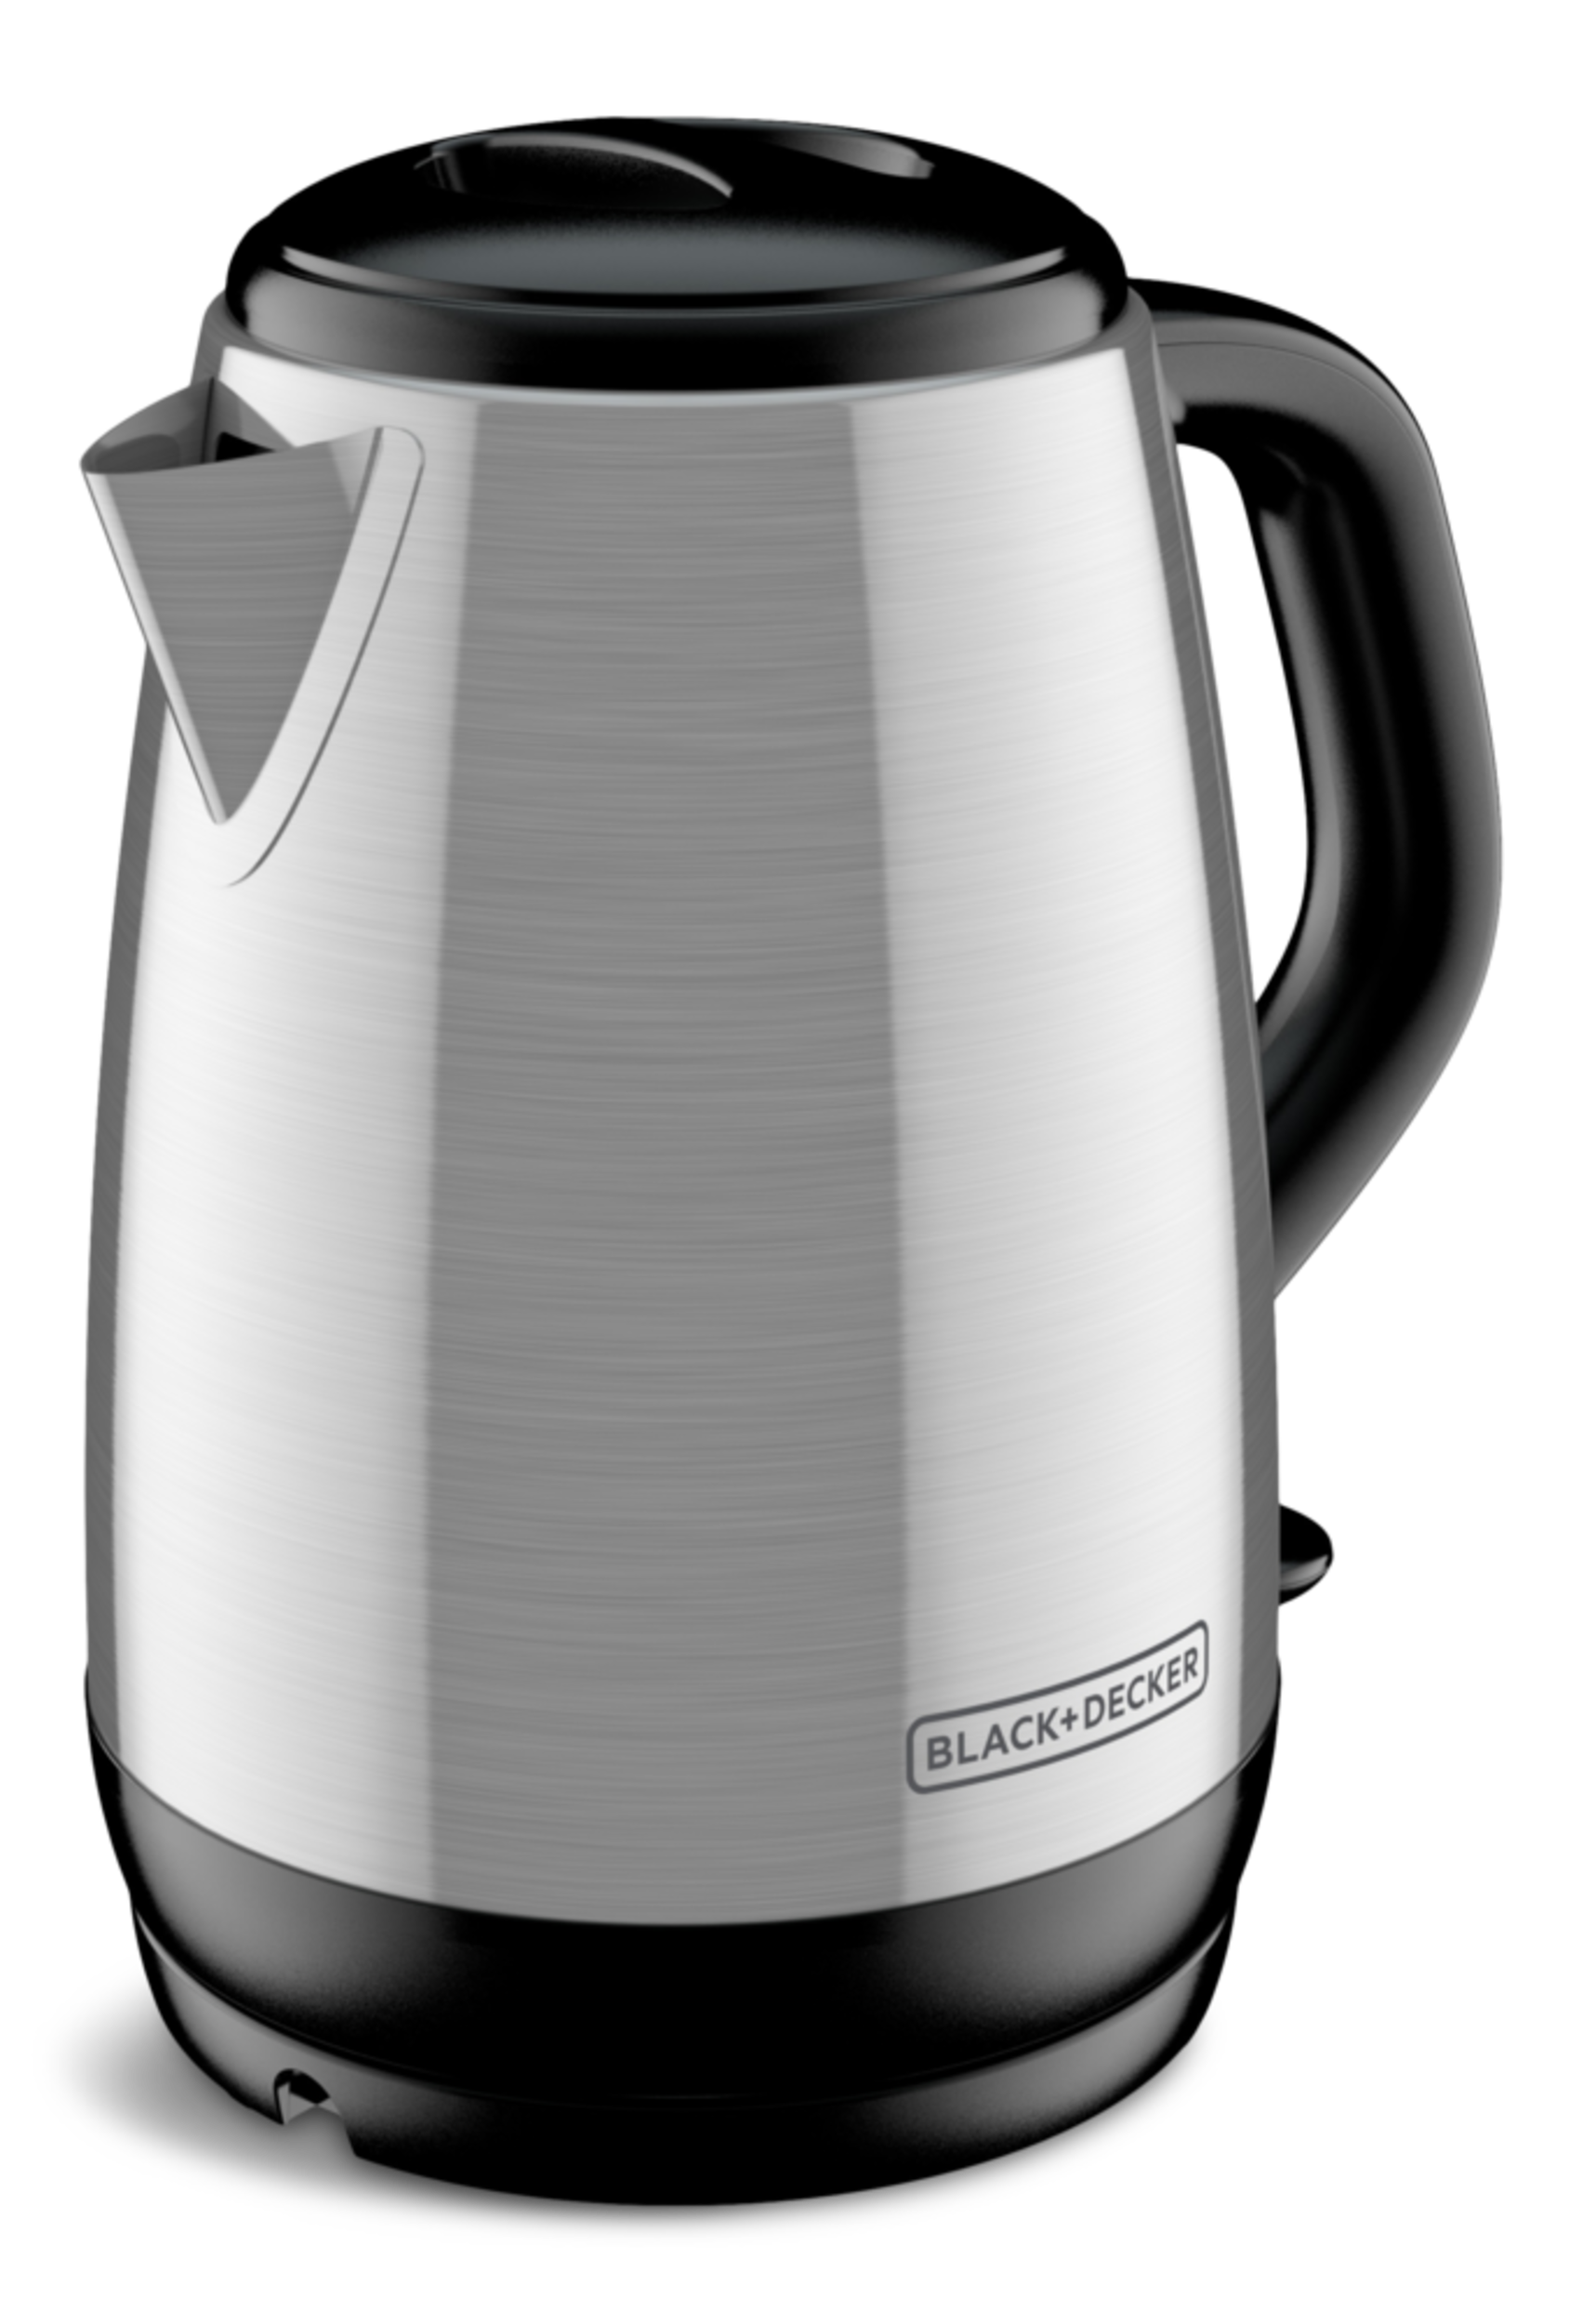 BLACK+DECKER Electric Cordless Kettle 1.7L - Stainless Steel